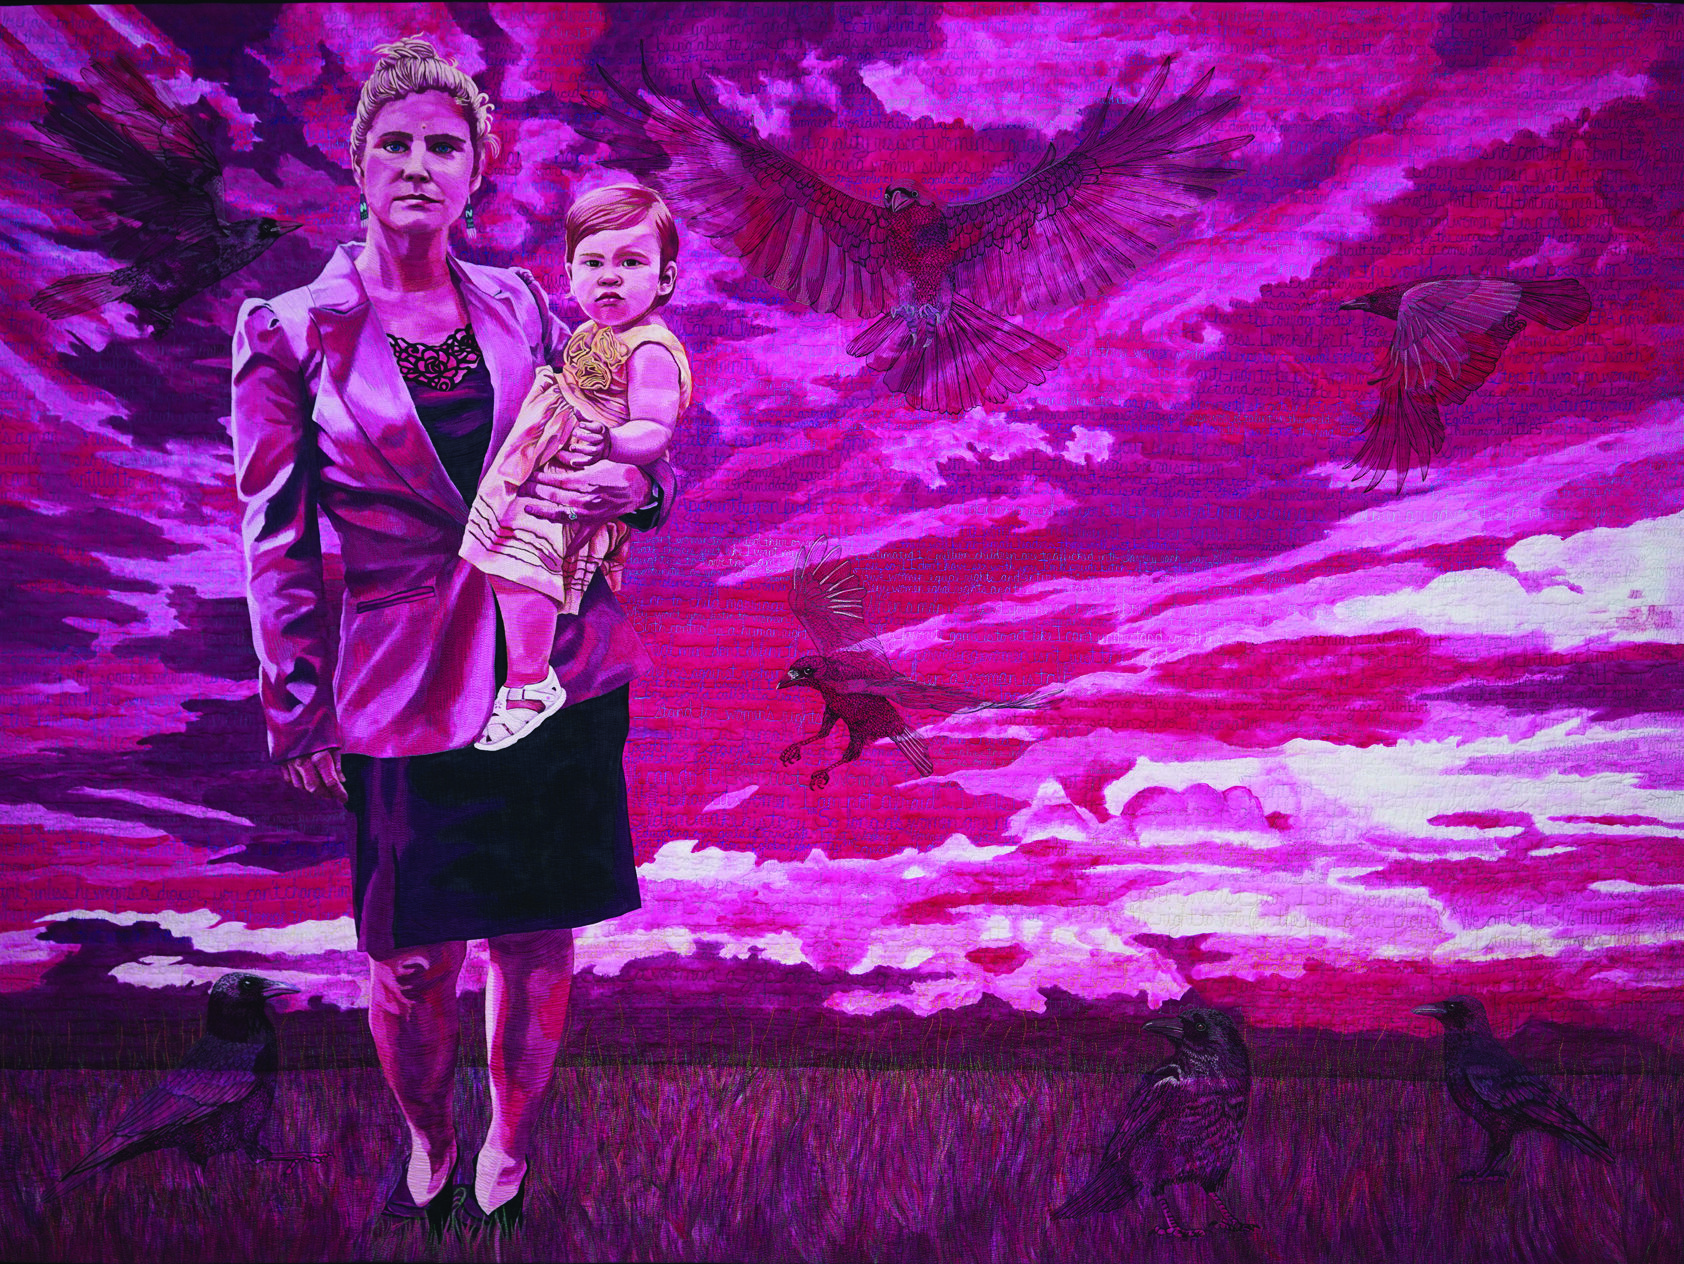 A quilted artwork, painted in shades of pink, depicting a white woman in a dress and blazer holding a baby wearing a dress. The woman and child show little expression as they look at the viewer, standing in a large open field with a cloudy sky behind them. They are surrounded by ghostly, semitransparent crows on the ground and in the sky. In the background, lines of text can be faintly seen.